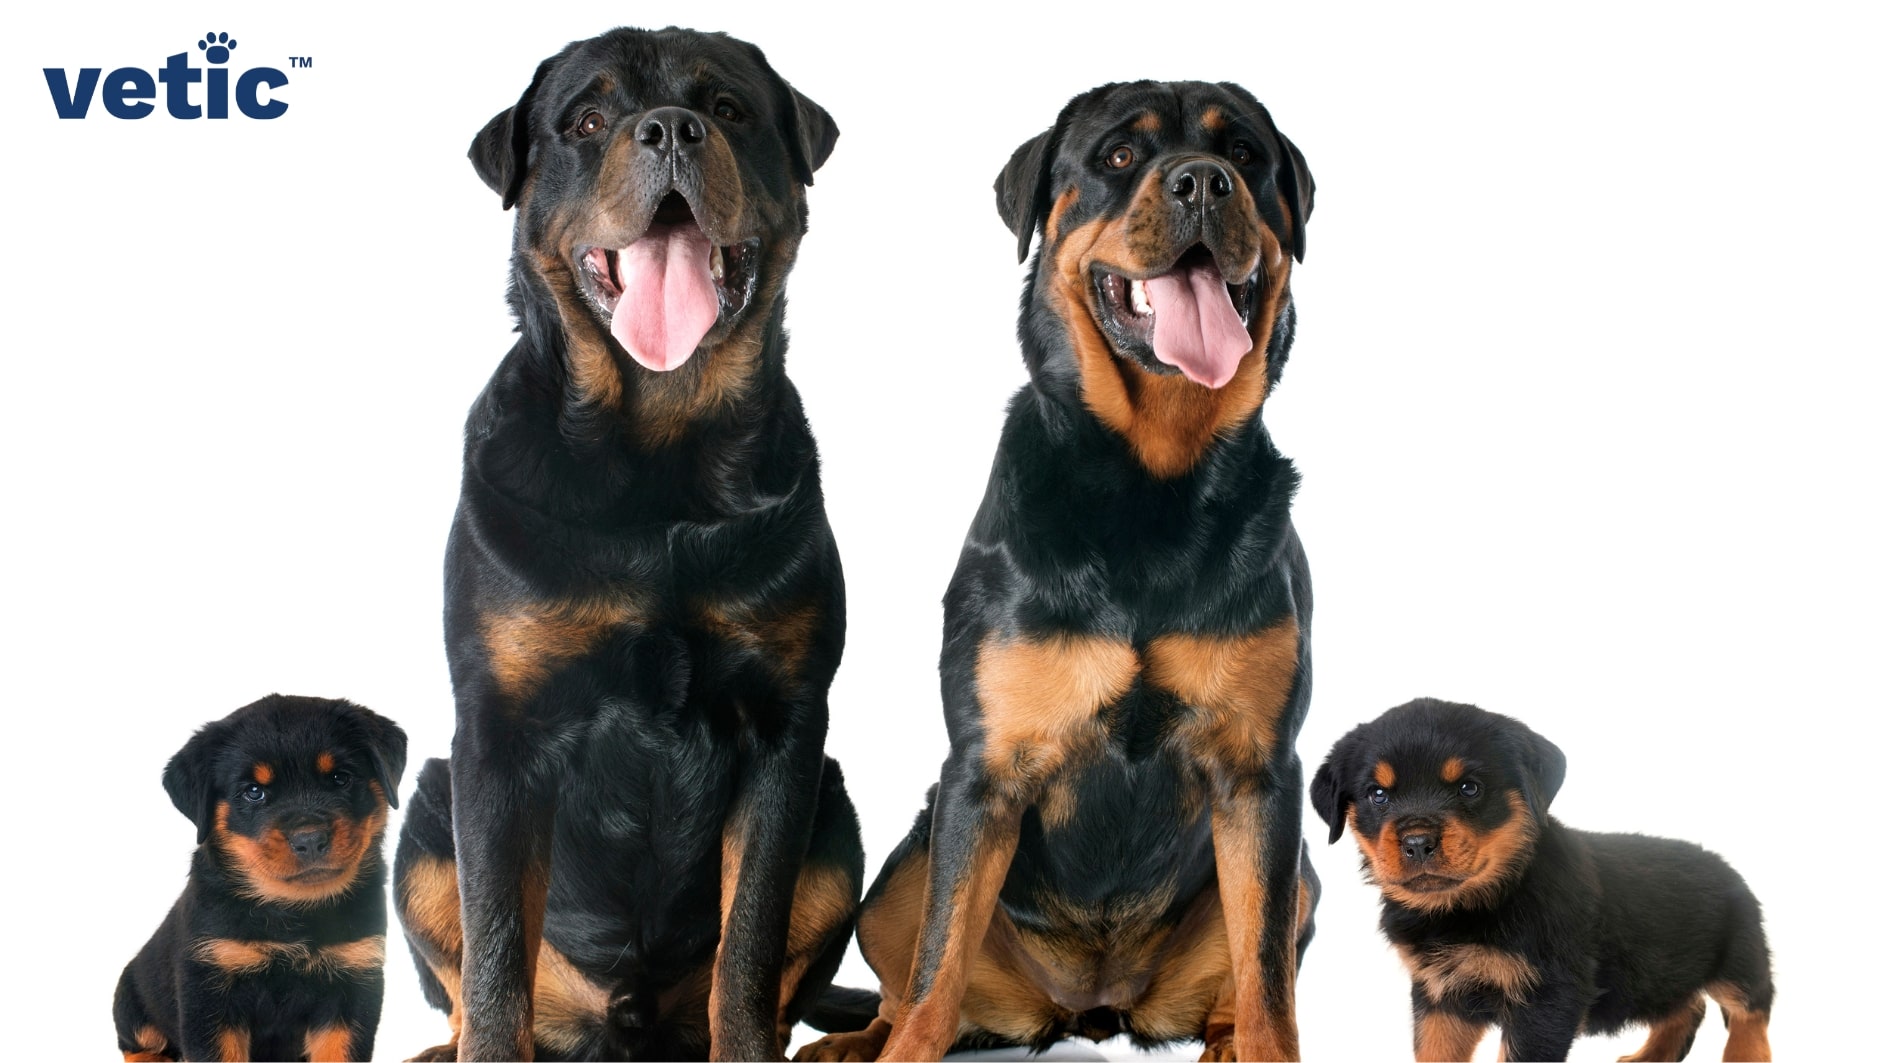 Rottweiler mum and dad sitting with two of their pups. One pup is standing next to it's mum. While the other one is sitting beside his dad. The entire family has proper Rottweiler Breed standard colours, markings, size and other physical traits.